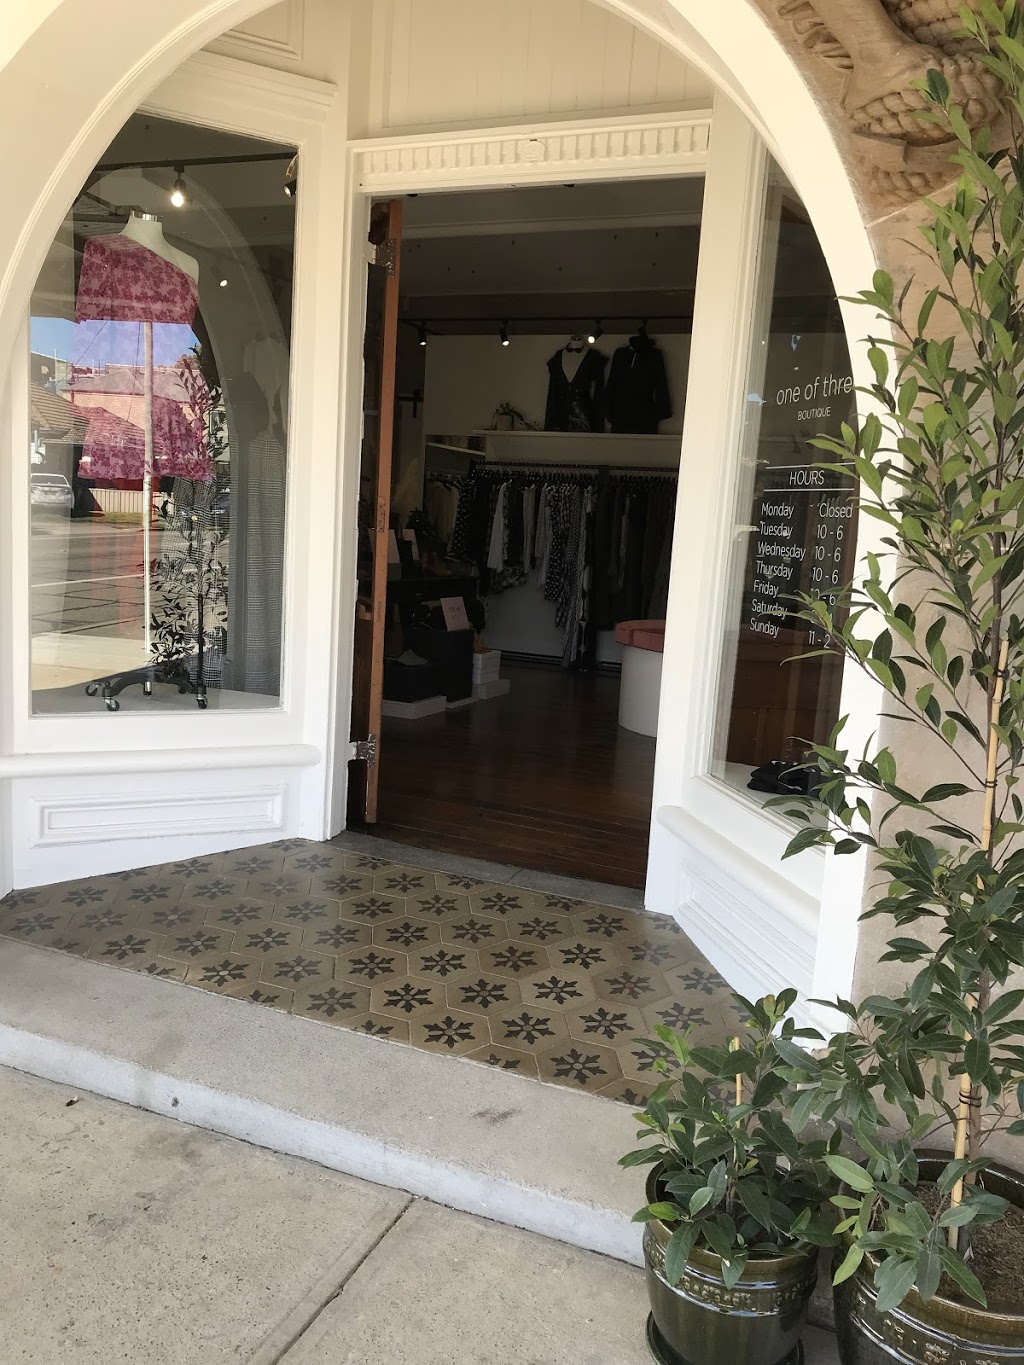 One of Three Boutique | clothing store | 394 George St, Windsor NSW 2756, Australia | 0438250444 OR +61 438 250 444